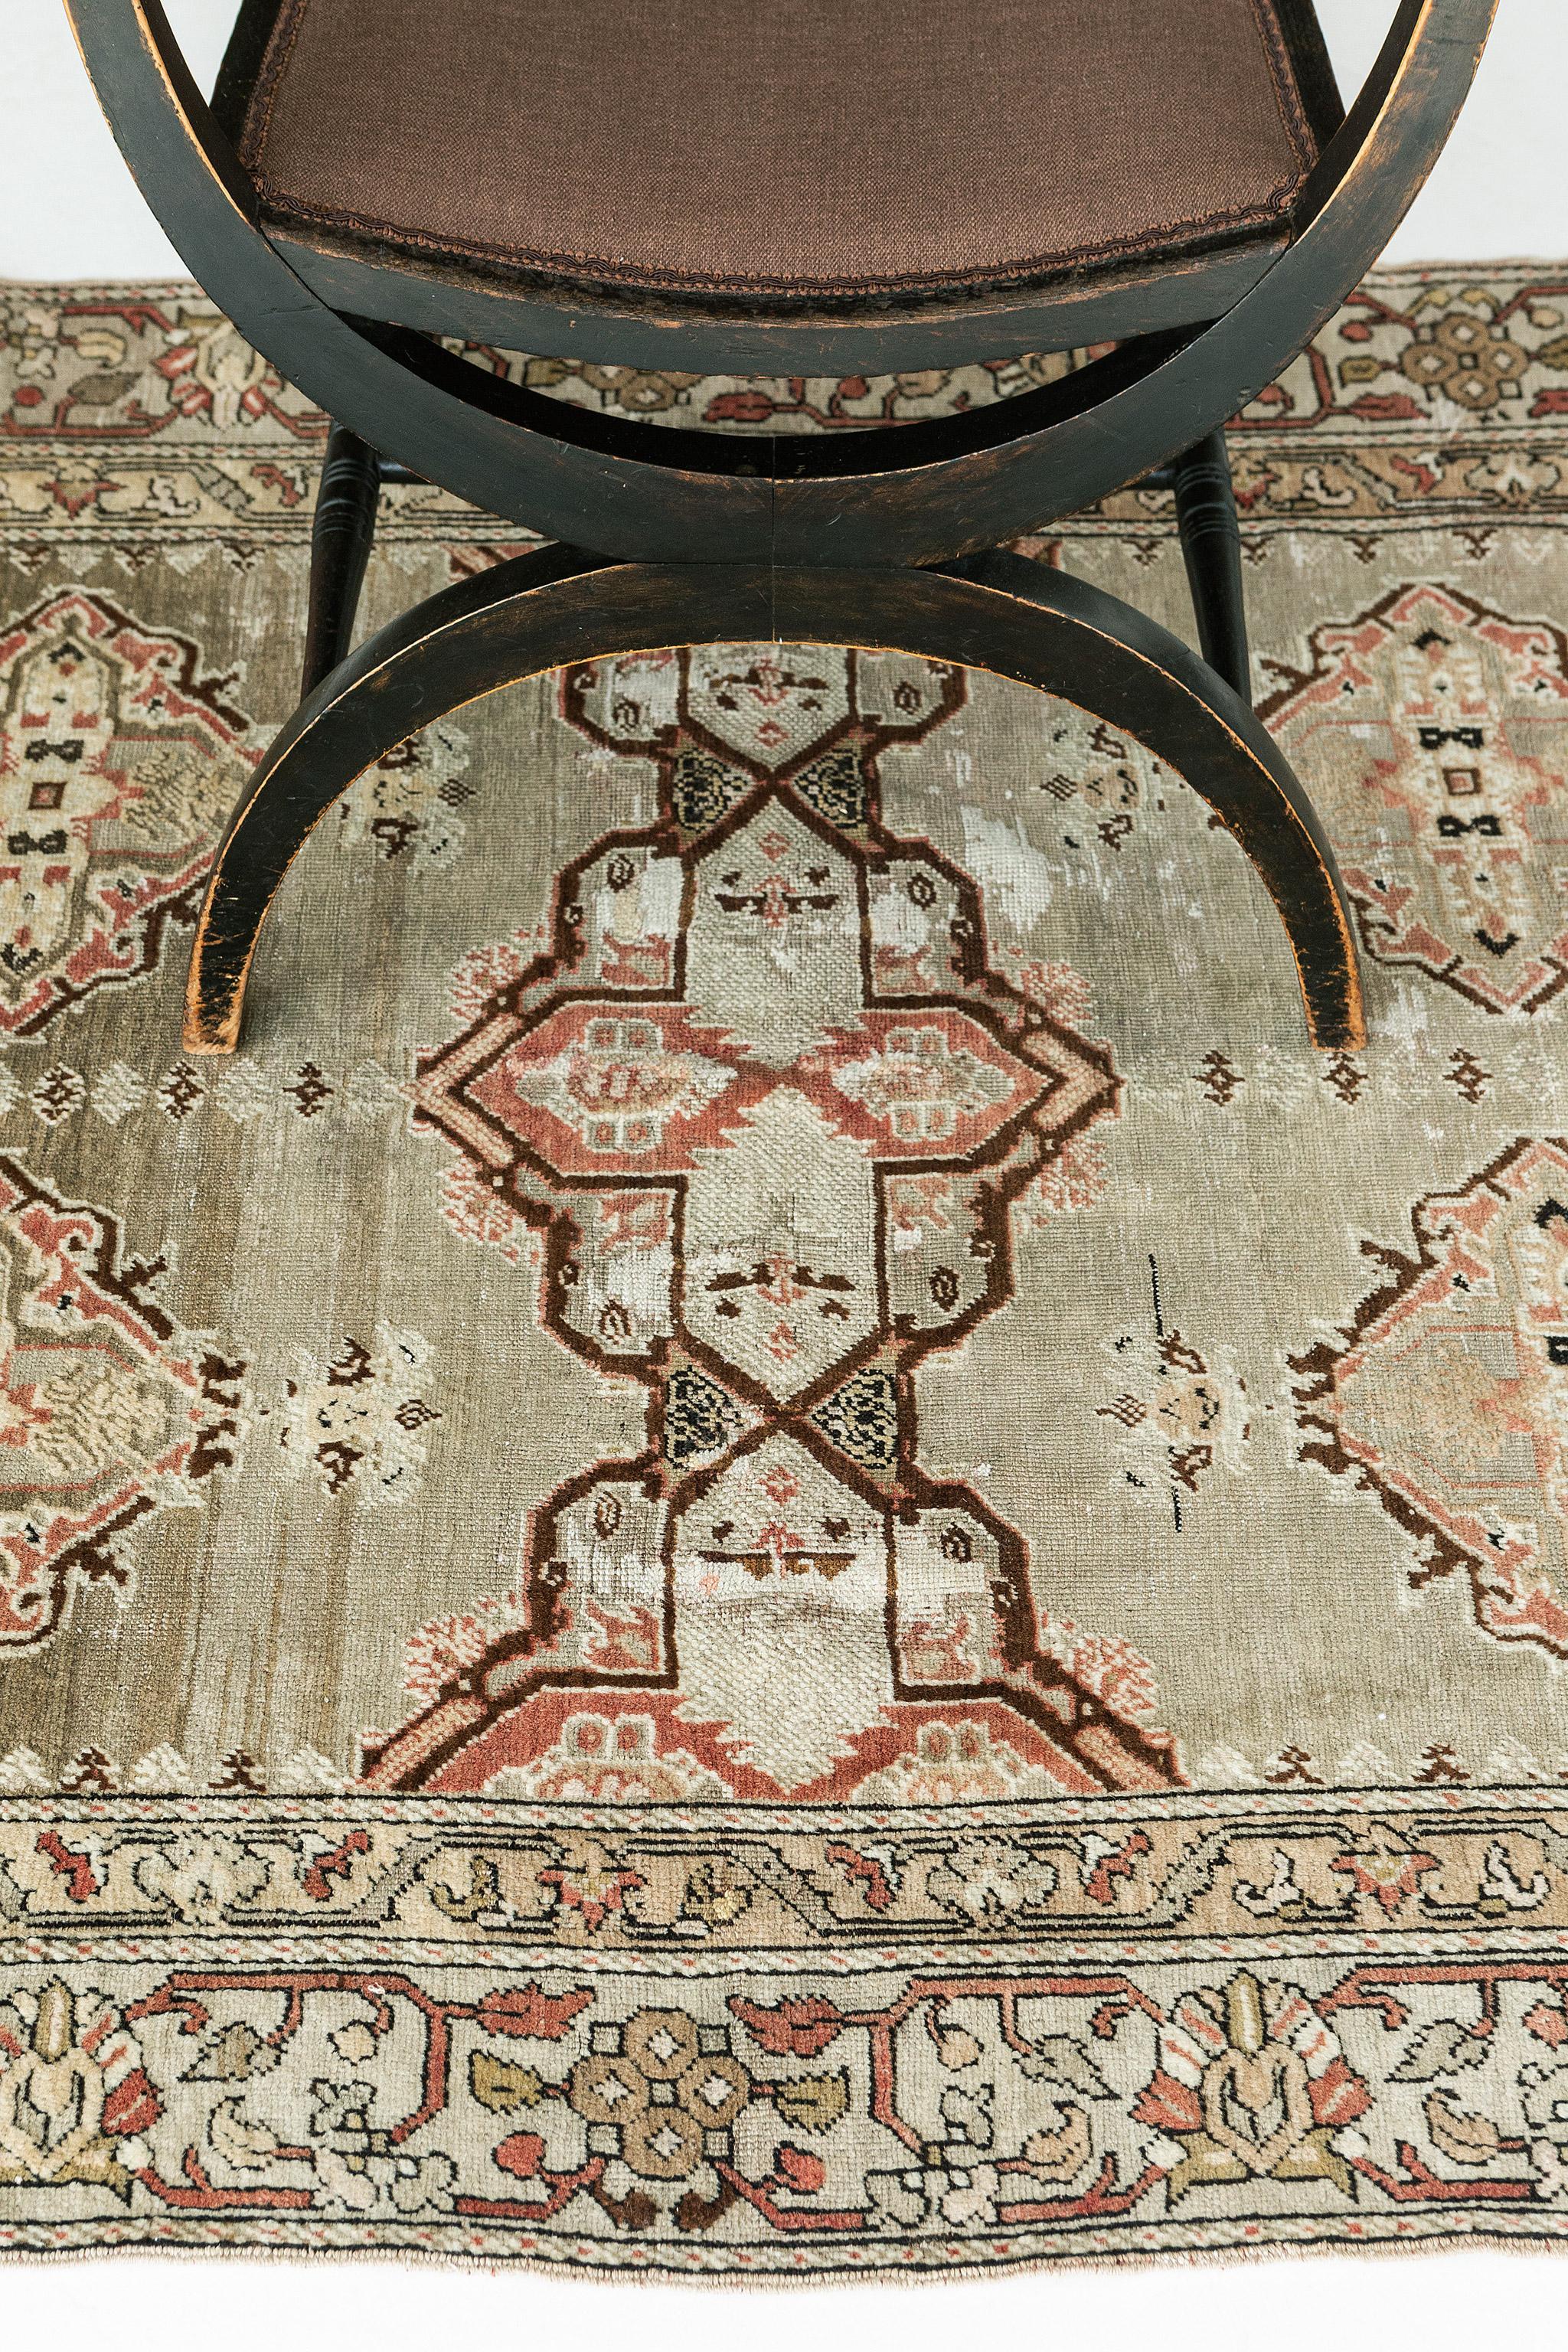 Soft elegance and warm pastel colors bring coordination to this Vintage Turkish Anatolian rug. It embodies lavish Anatolian style with an all-over ornate pattern composed of palmettes and rosettes dancing between a subtle latticework trellis. A